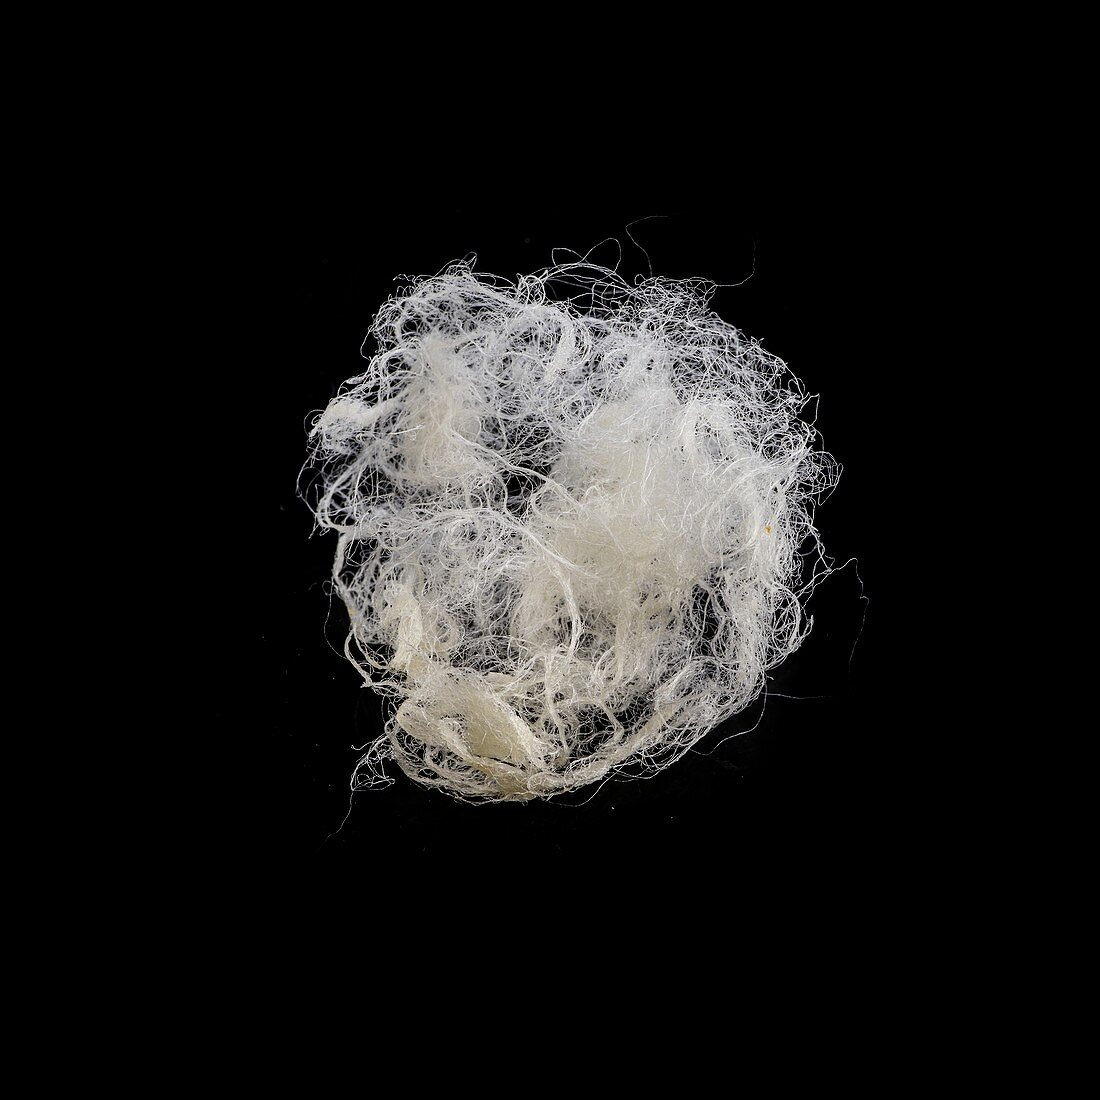 Silk fibres from cocoon